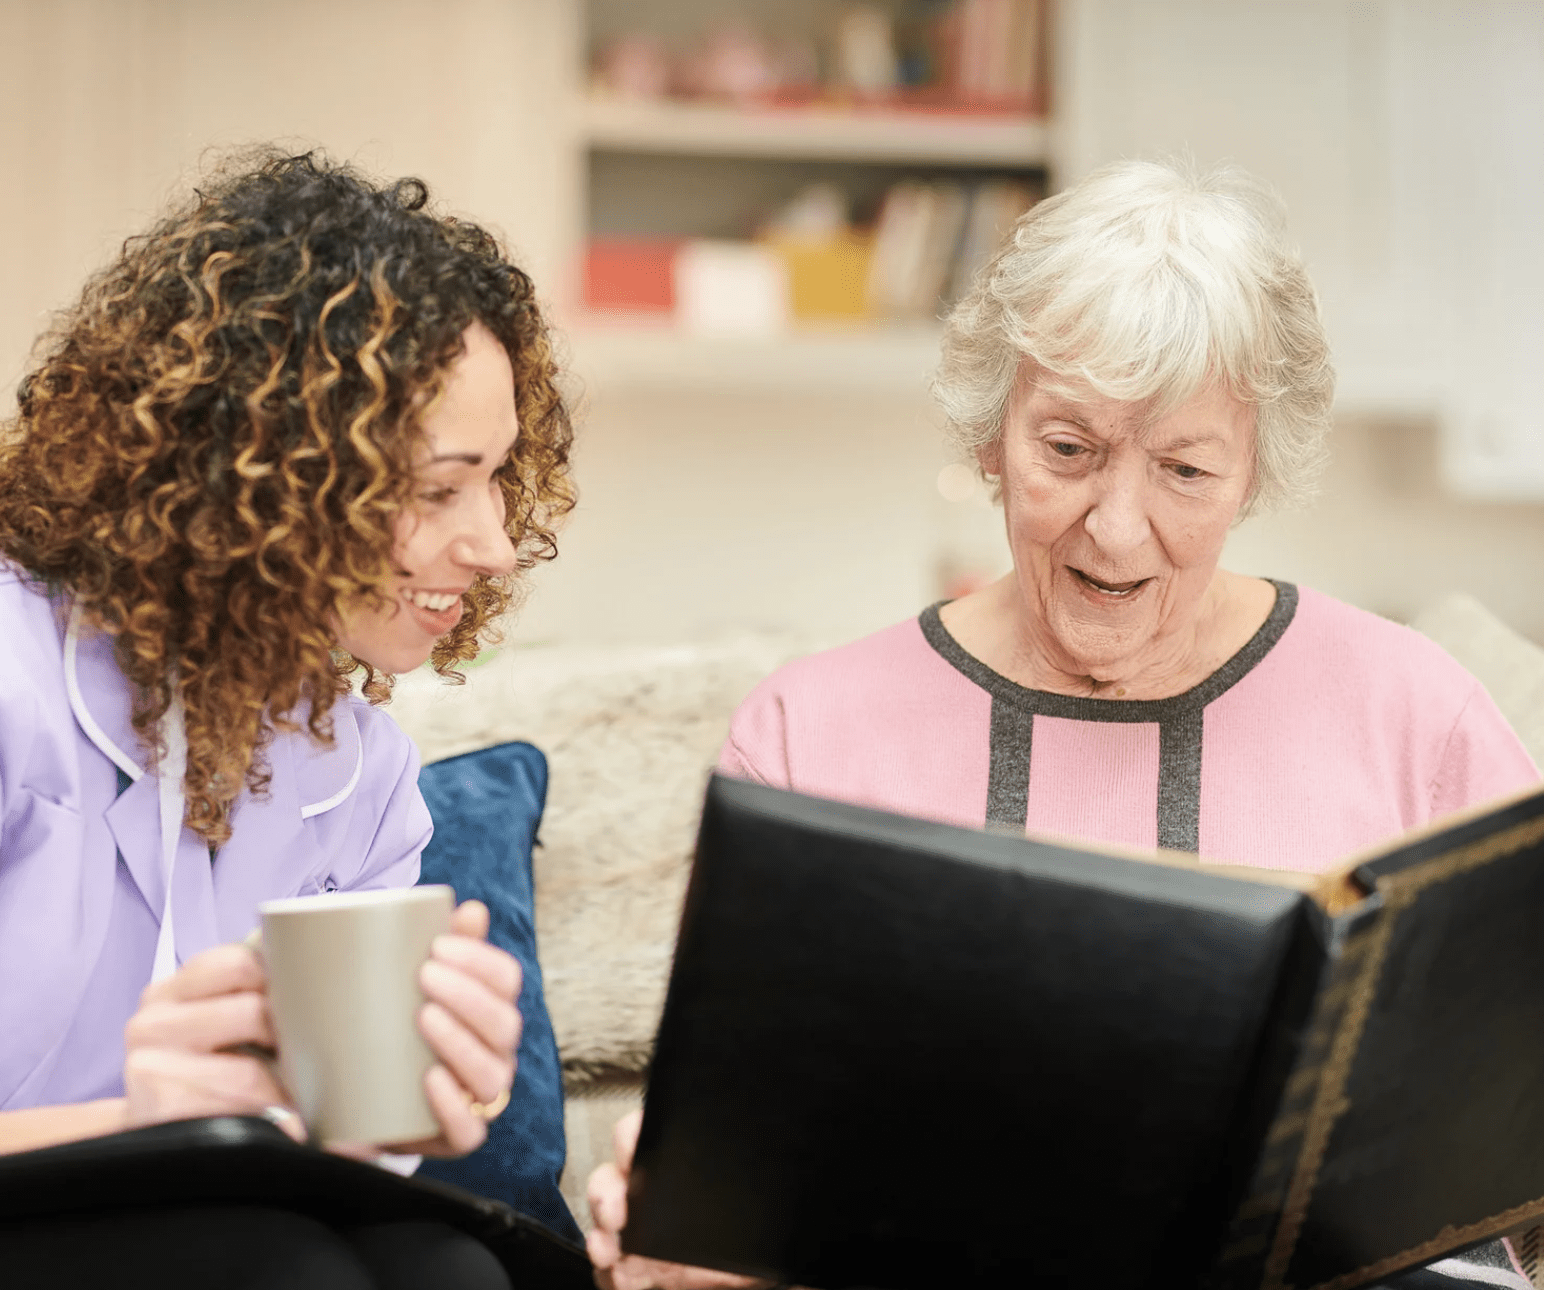 5 Things to Look for in Memory Care Community